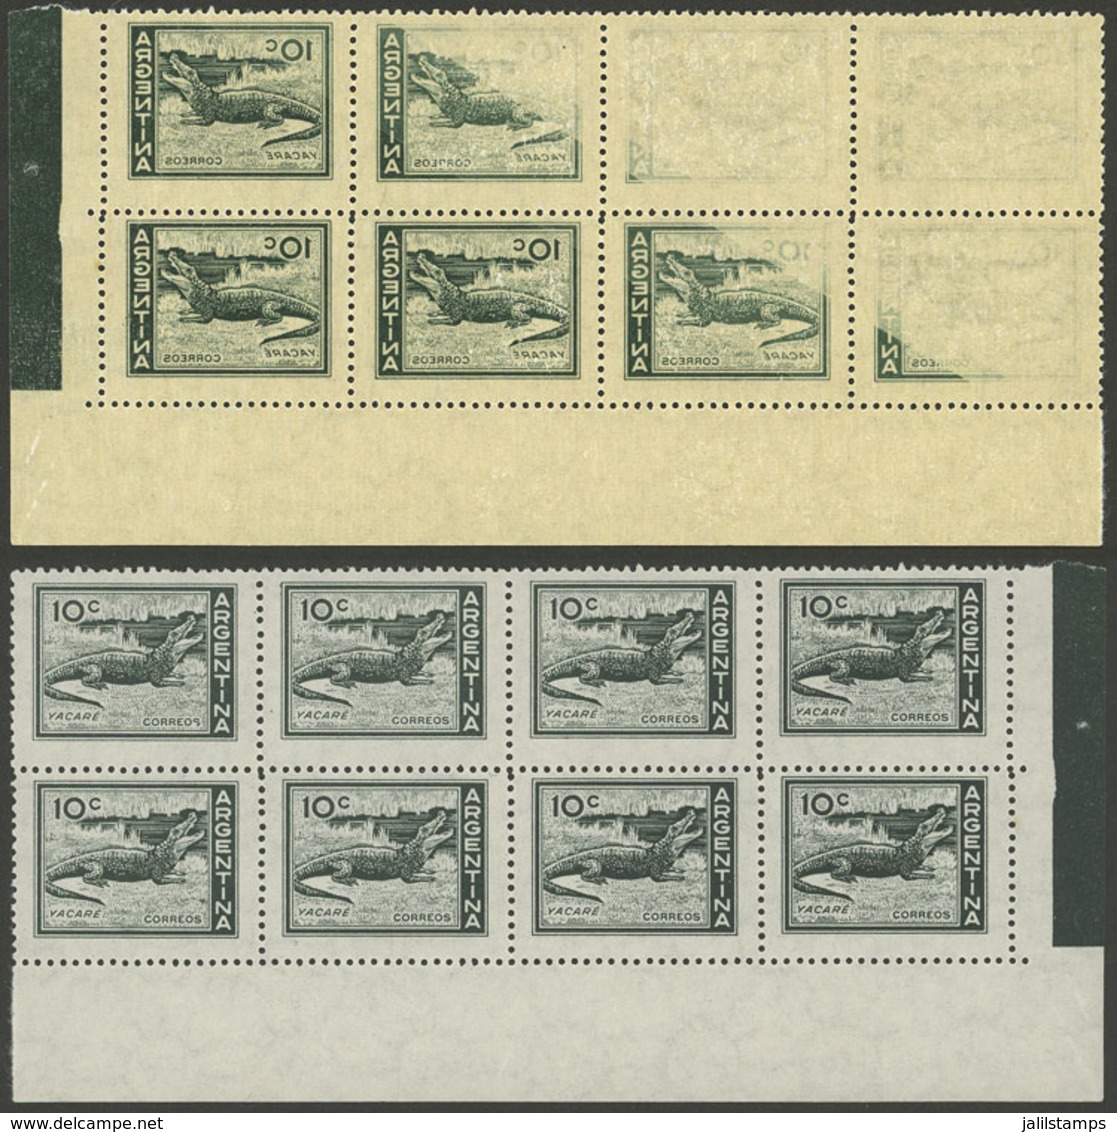 ARGENTINA: GJ.1123CA, 10c. Yacare Caiman, Block Of 8 With OFFSET IMPRESSION ON BACK, Excellent! - Neufs